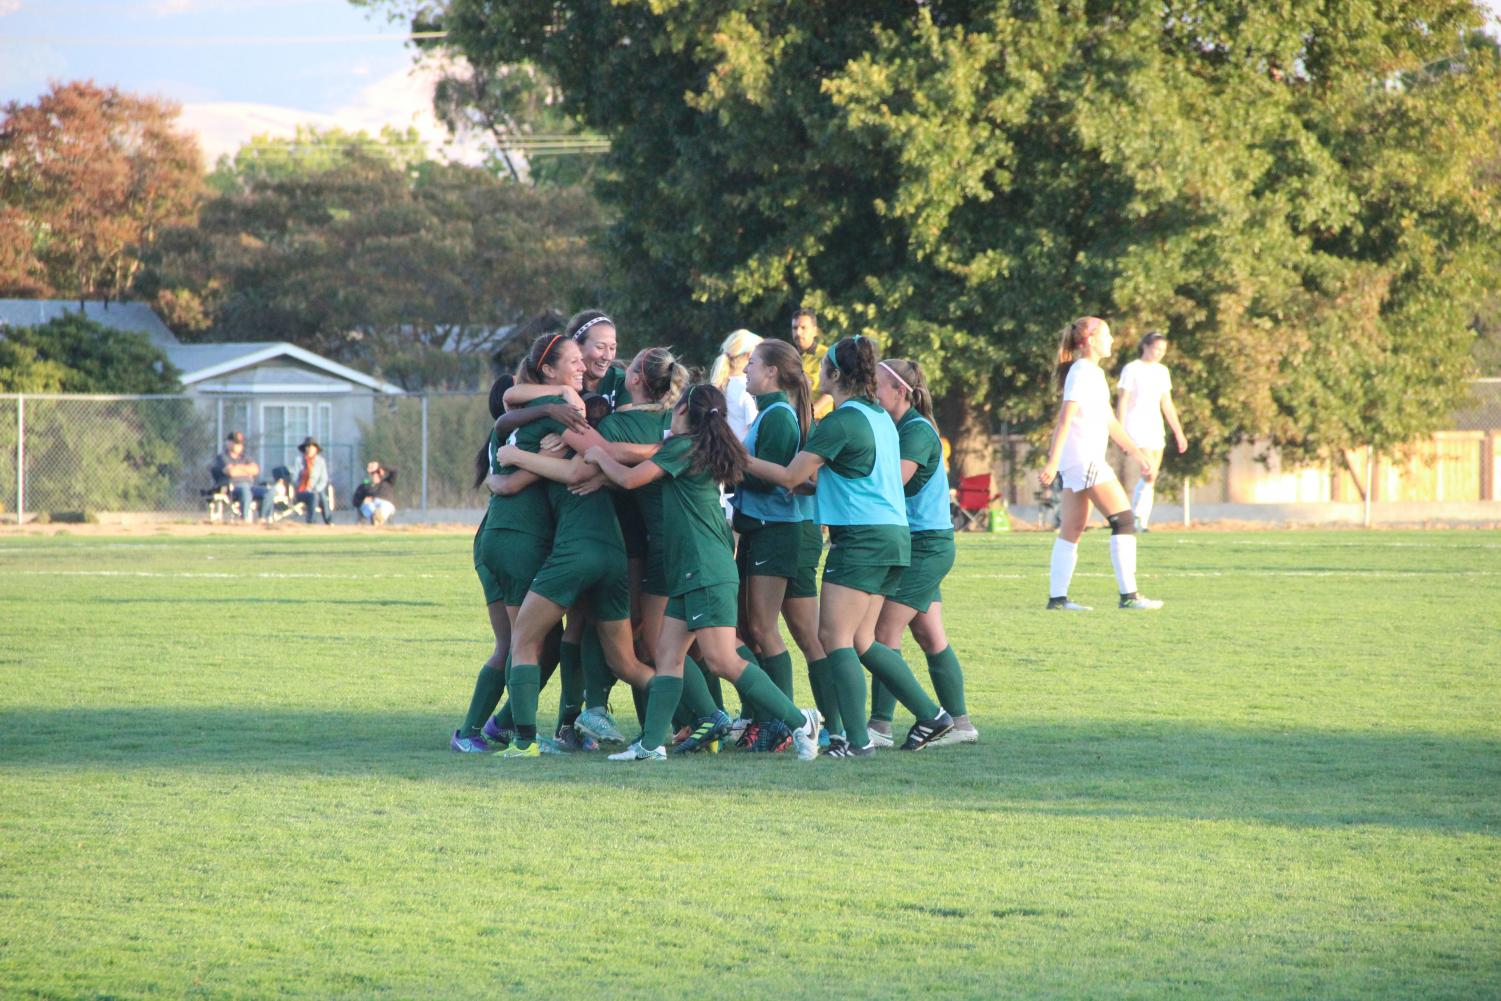 DVC celebrates their 2-1 victory over top ranked Folsom Lake at Viking Field on Tuesday, Oct. 31. | Photo by DVC Inquirer's Luis Lopez